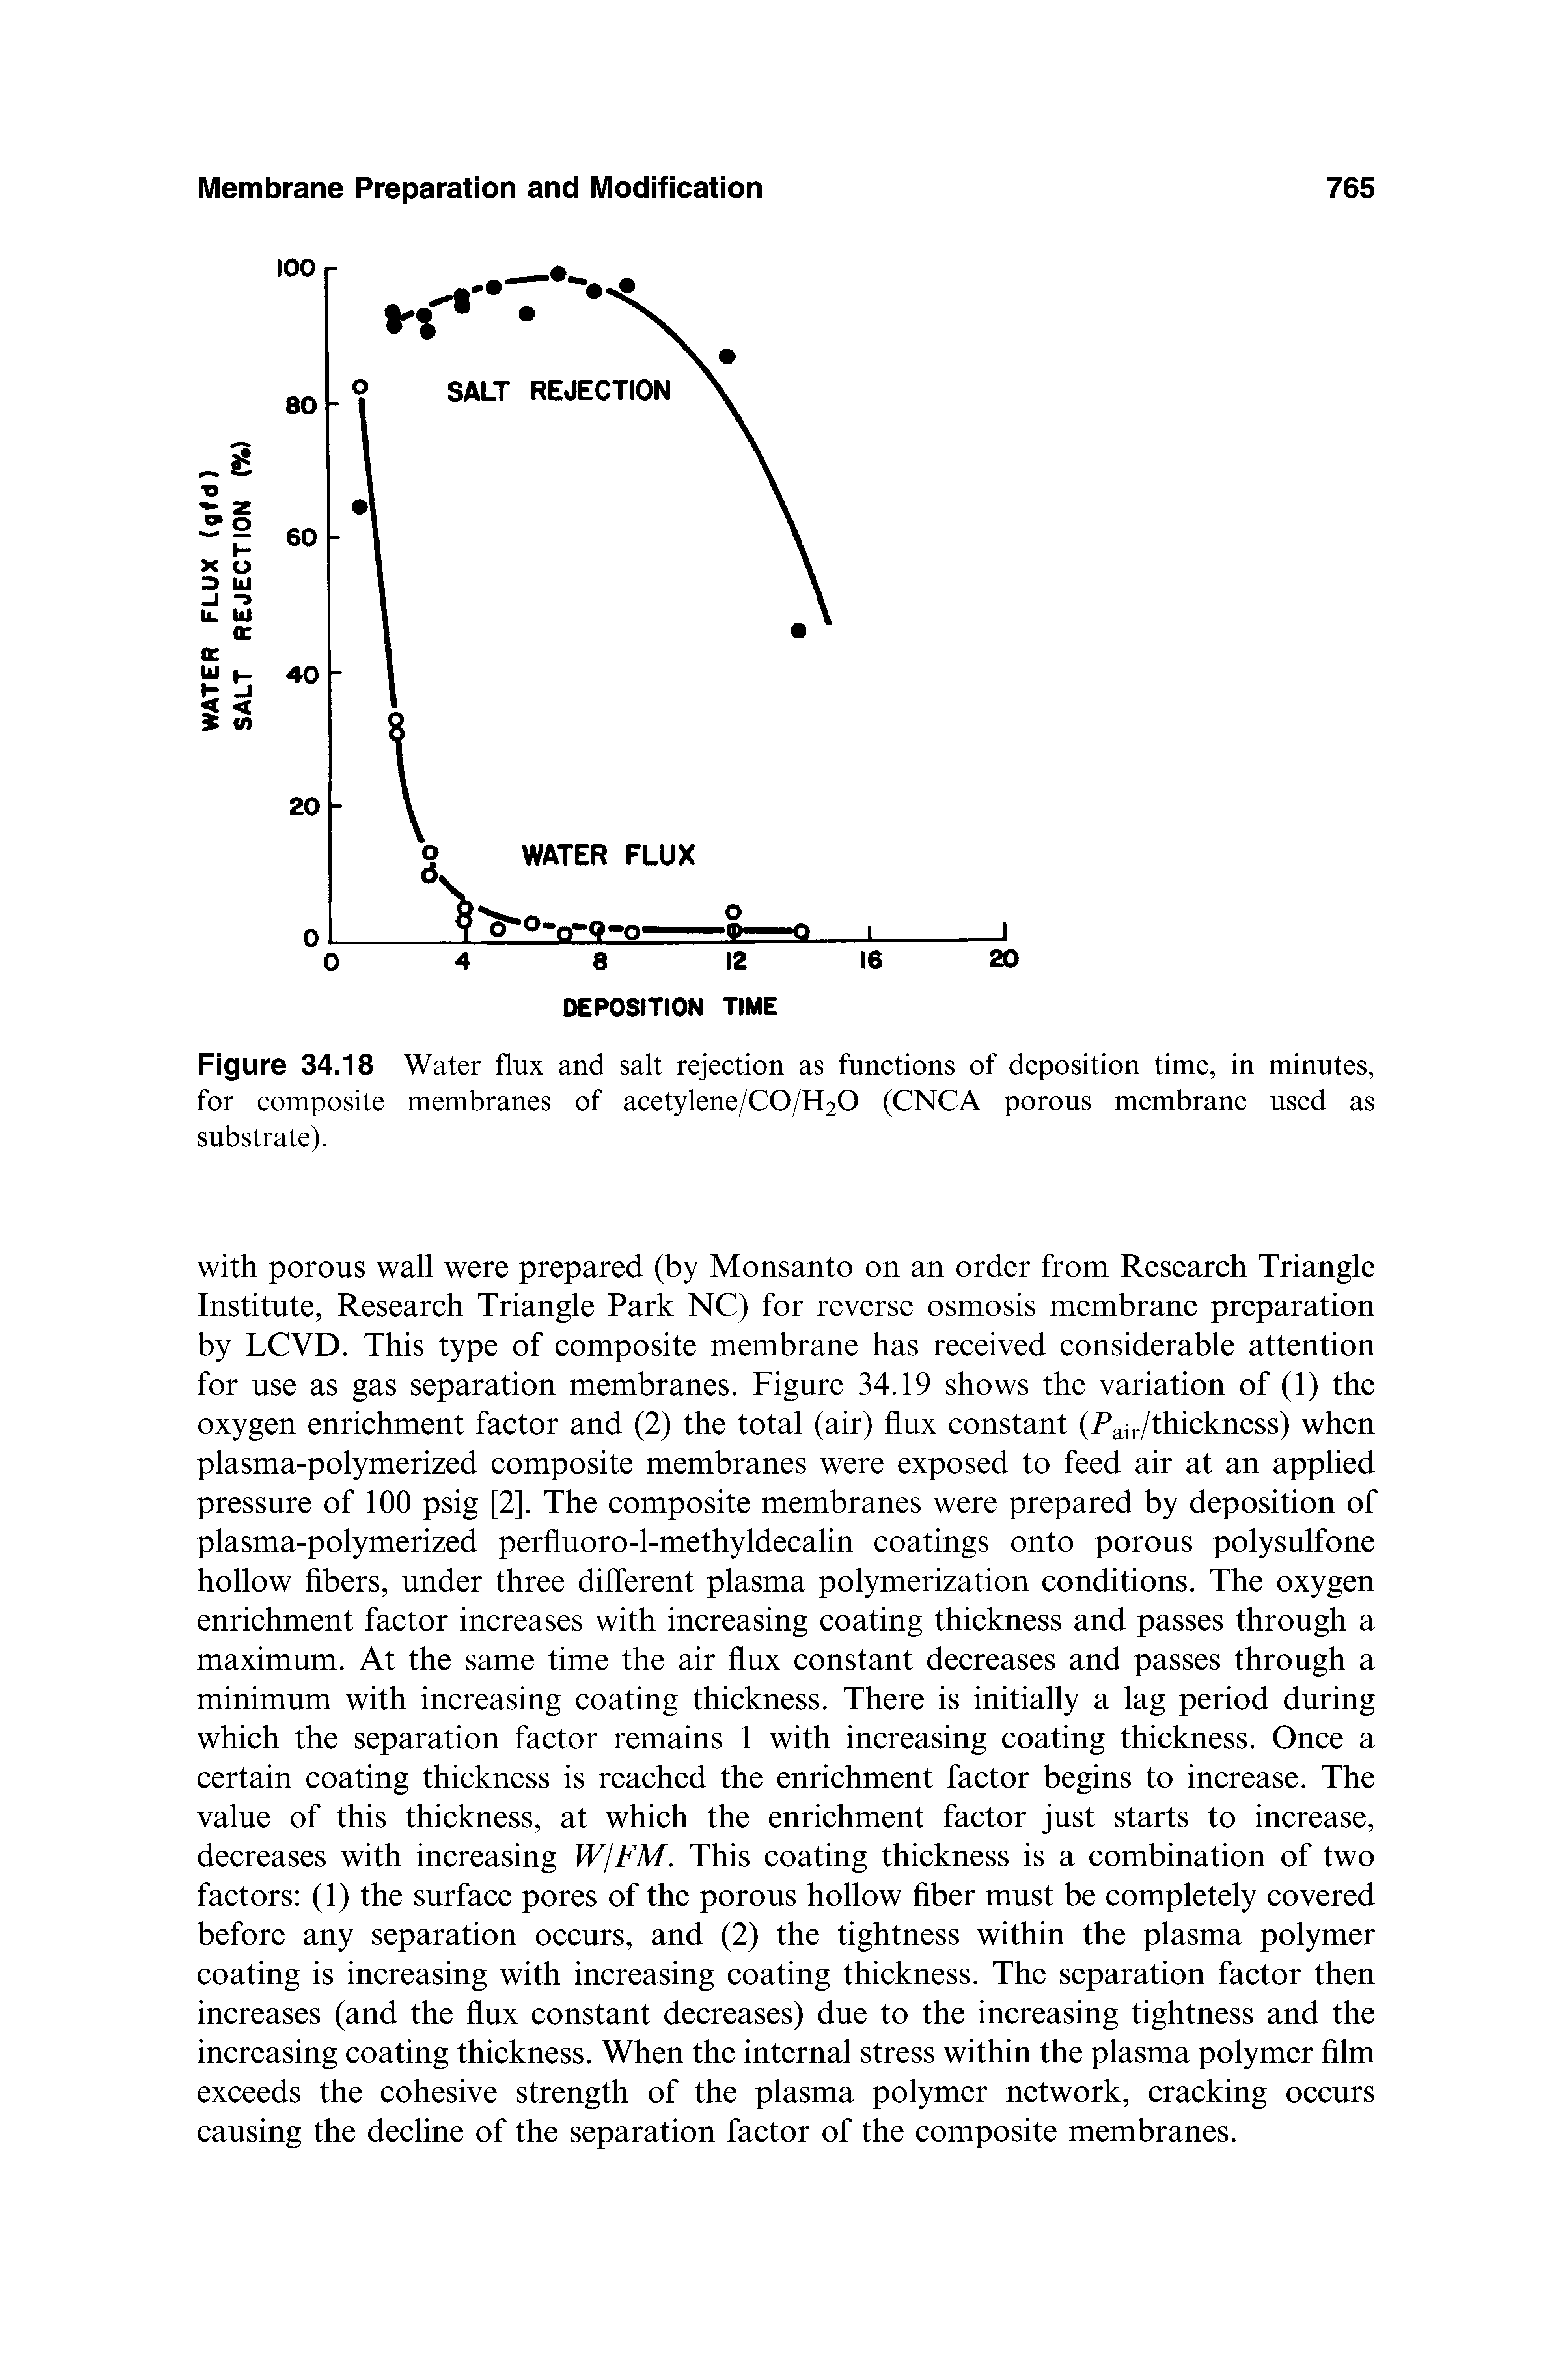 Figure 34.18 Water flux and salt rejection as functions of deposition time, in minutes, for composite membranes of acetylene/C0/H20 (CNCA porous membrane used as substrate).